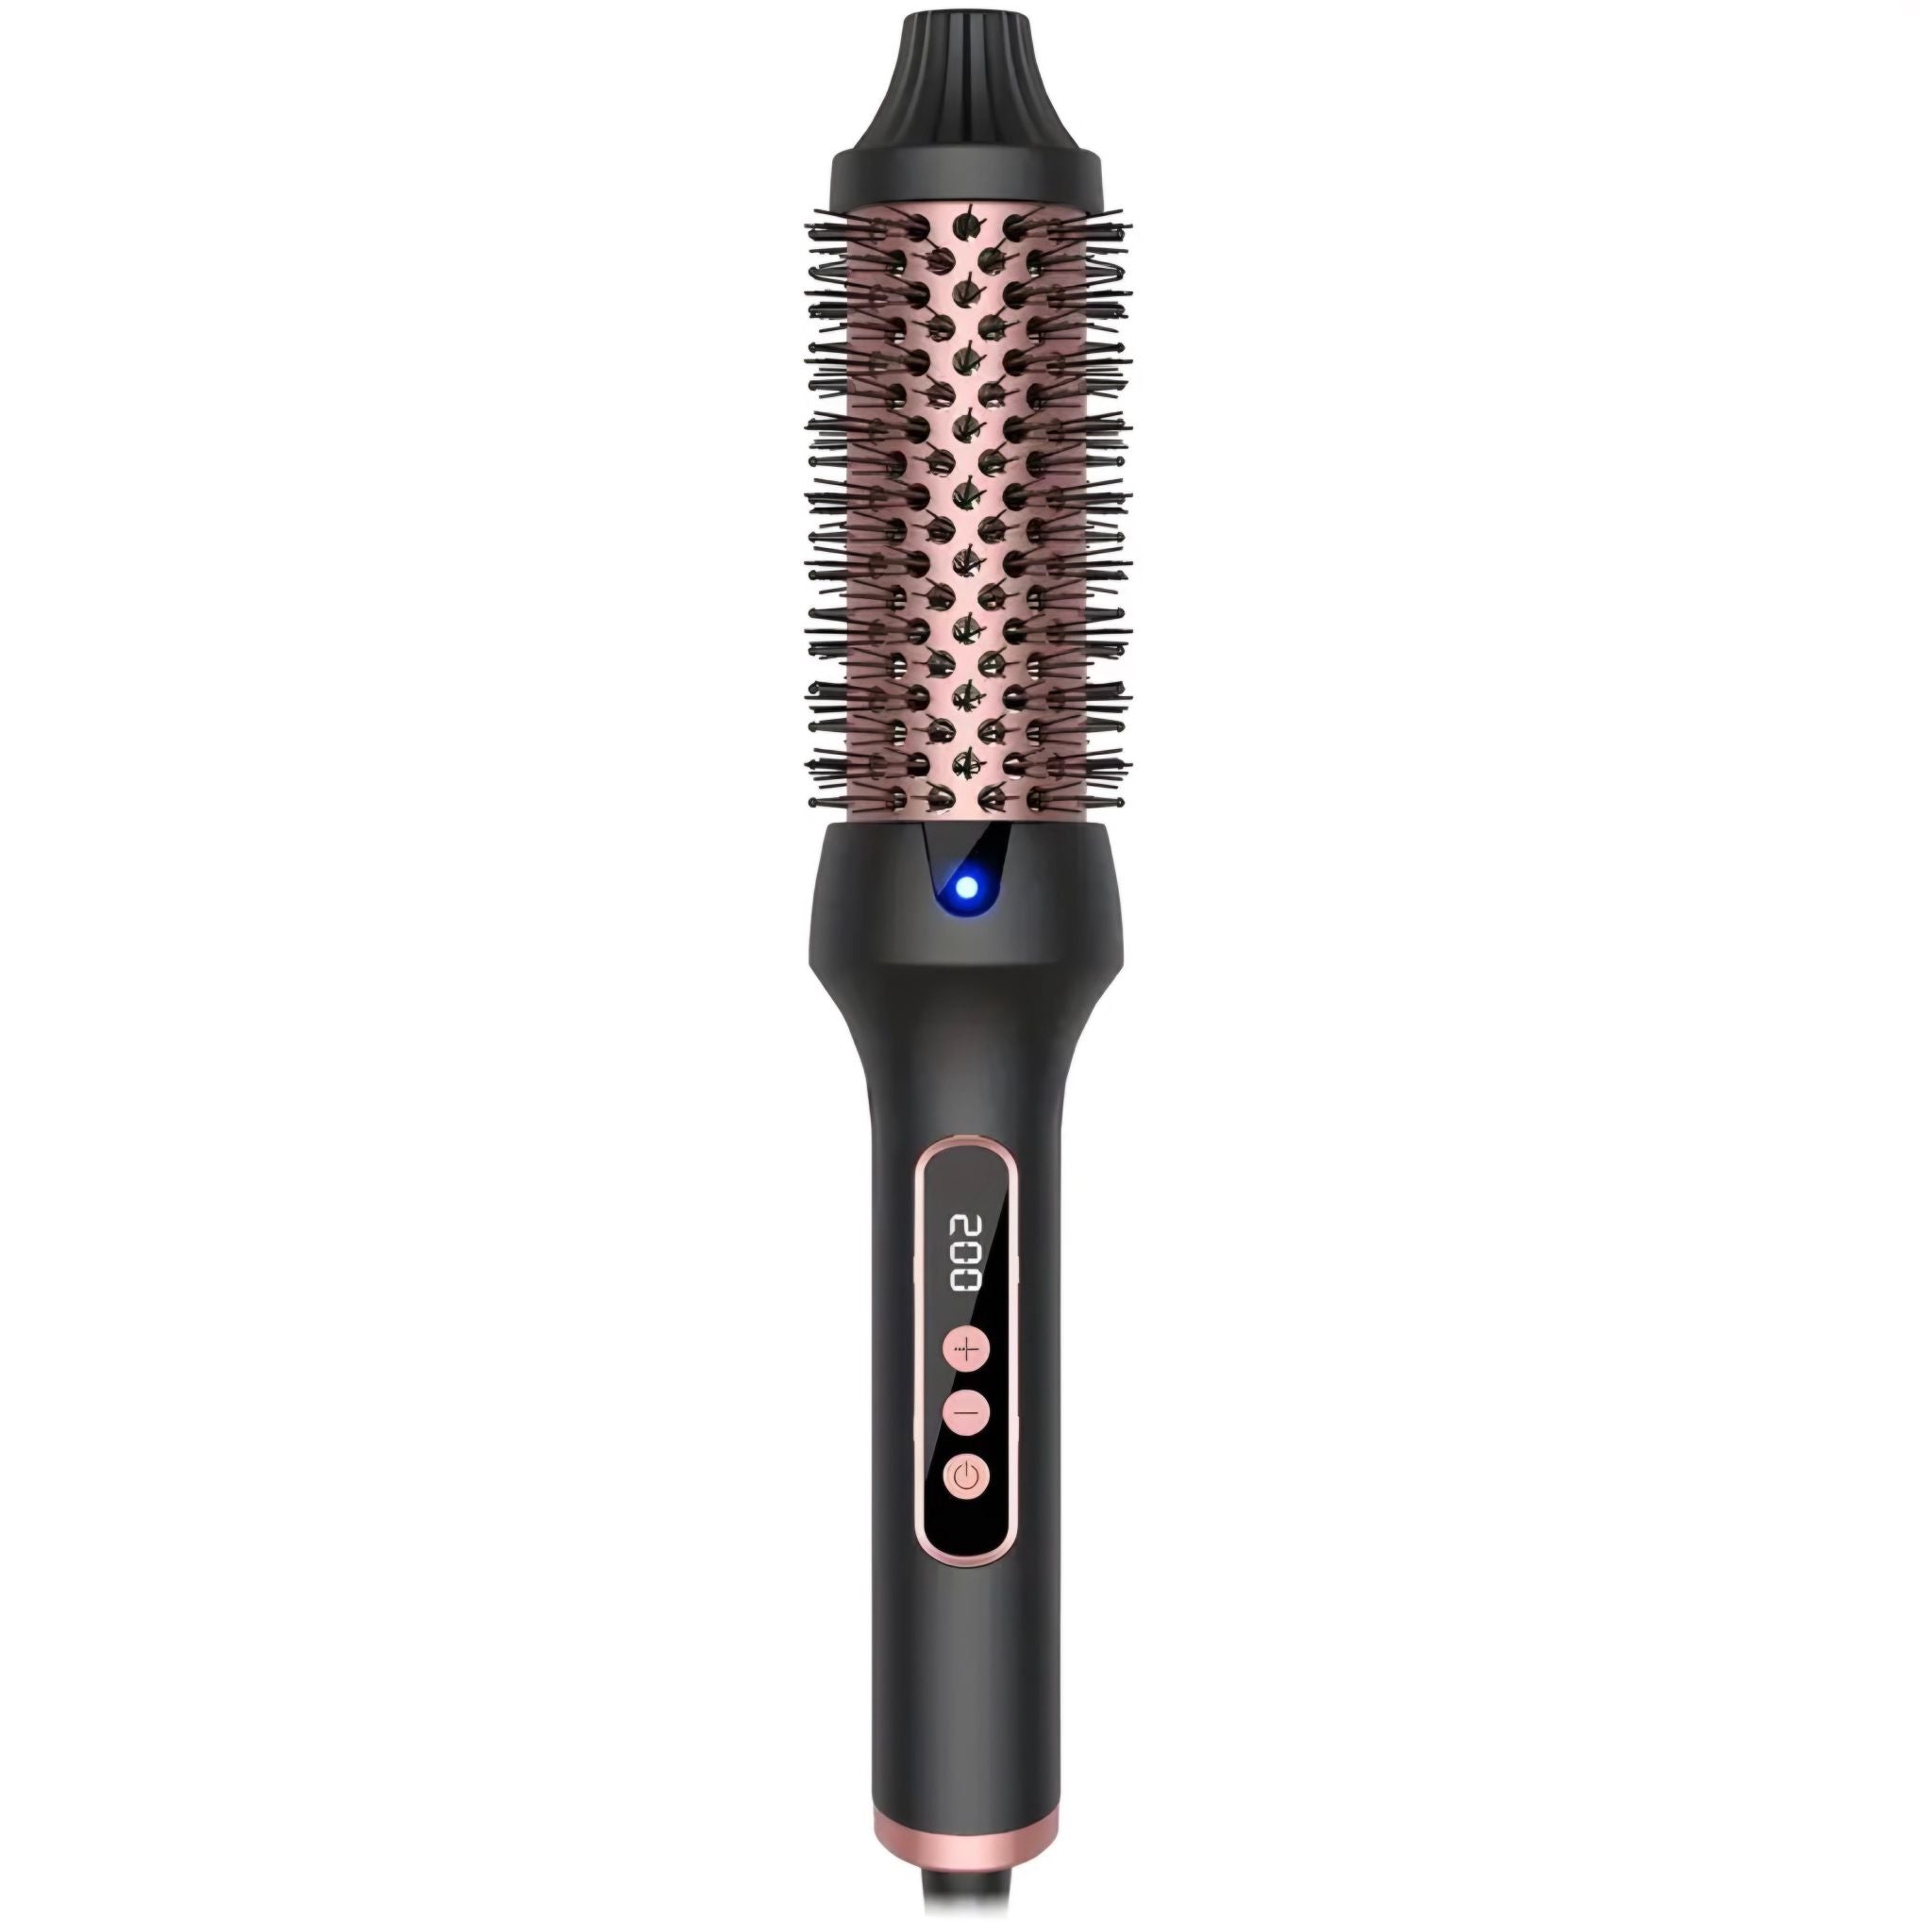  professional 3-in-1 ionic hair styling